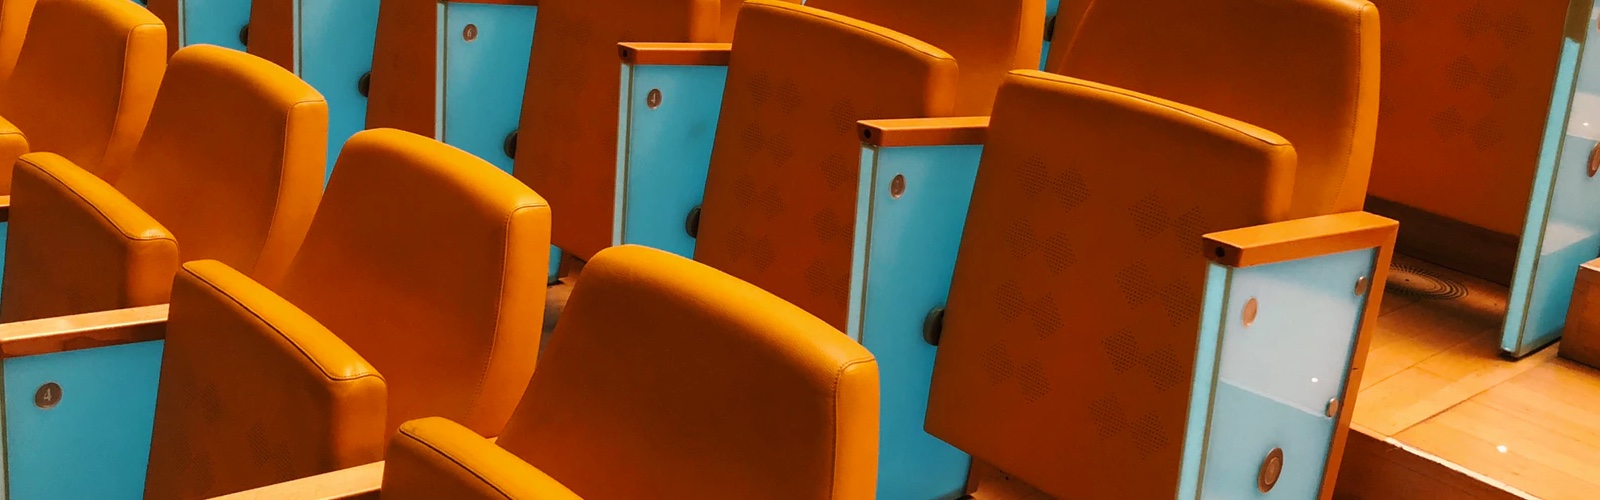 a close up landscape image of 2 rows of bright orange seats at a staduim with blue panels on the sides of the seats